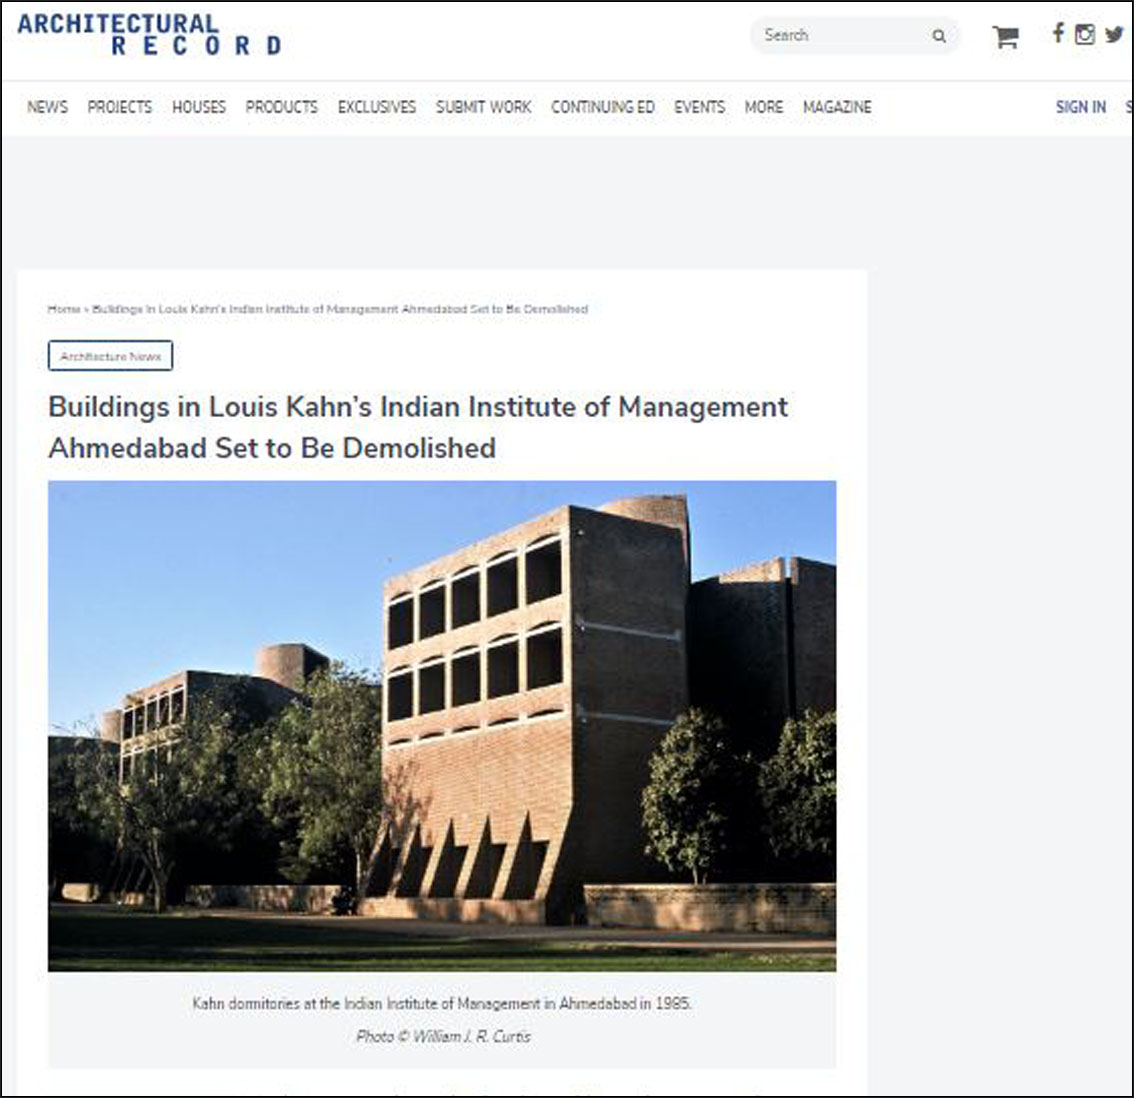 Buildings in Louis Kahn?s Indian Institute of Management Ahmedabad Set to Be Demolished, architectural record -